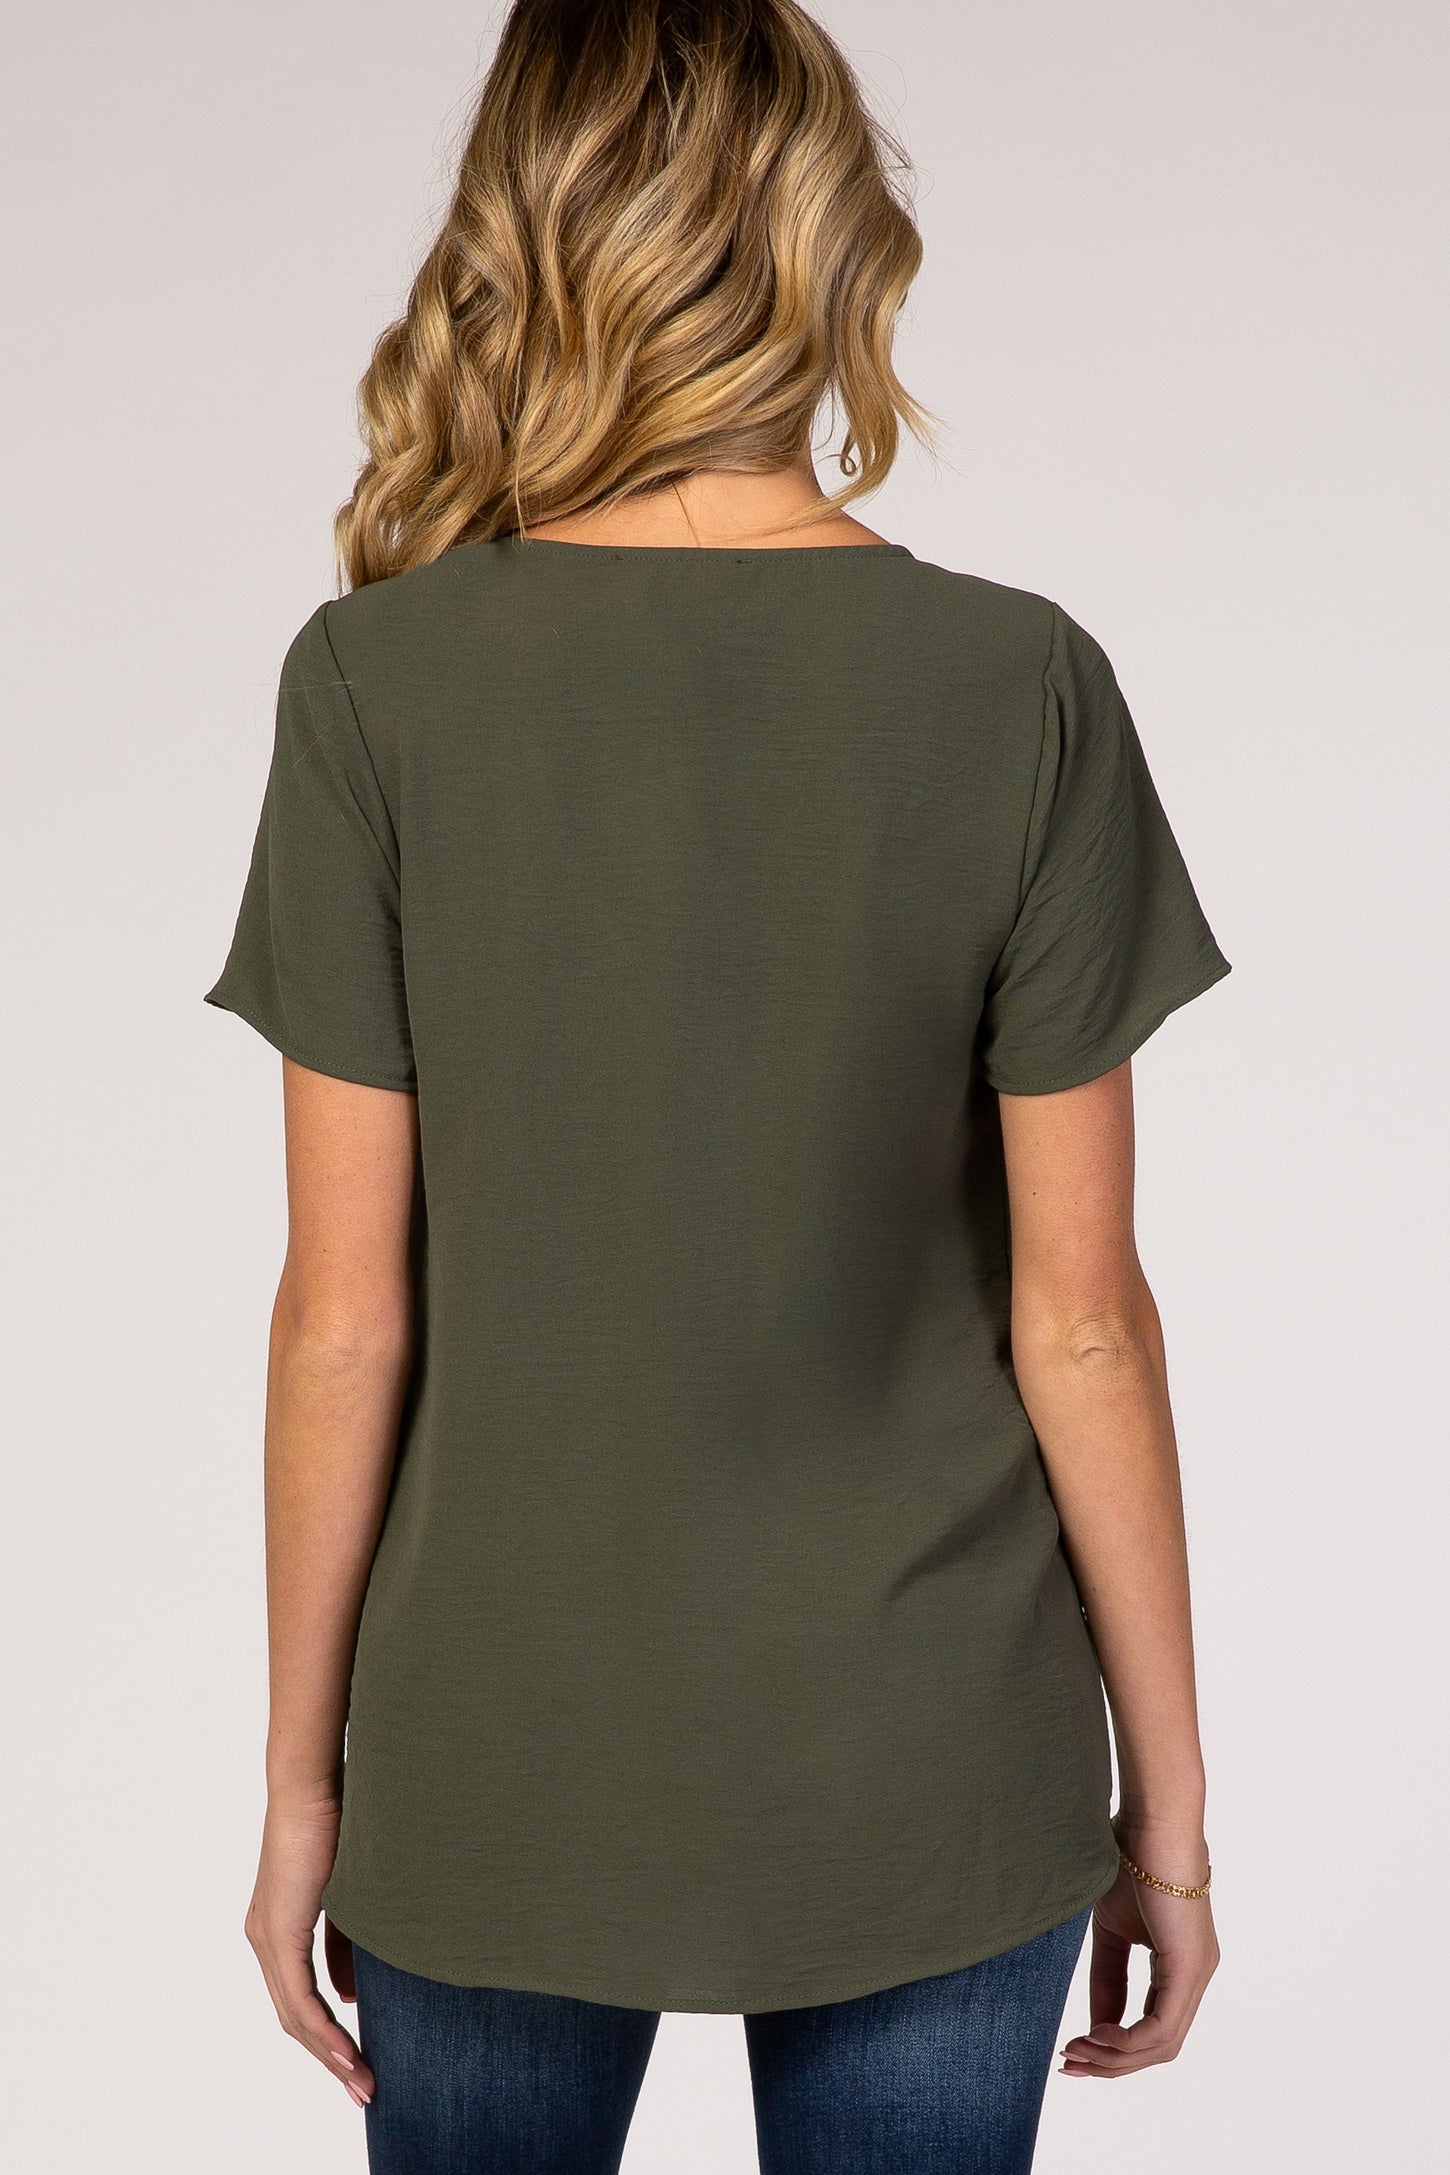 Light Olive Button Tie Front Maternity Top– PinkBlush